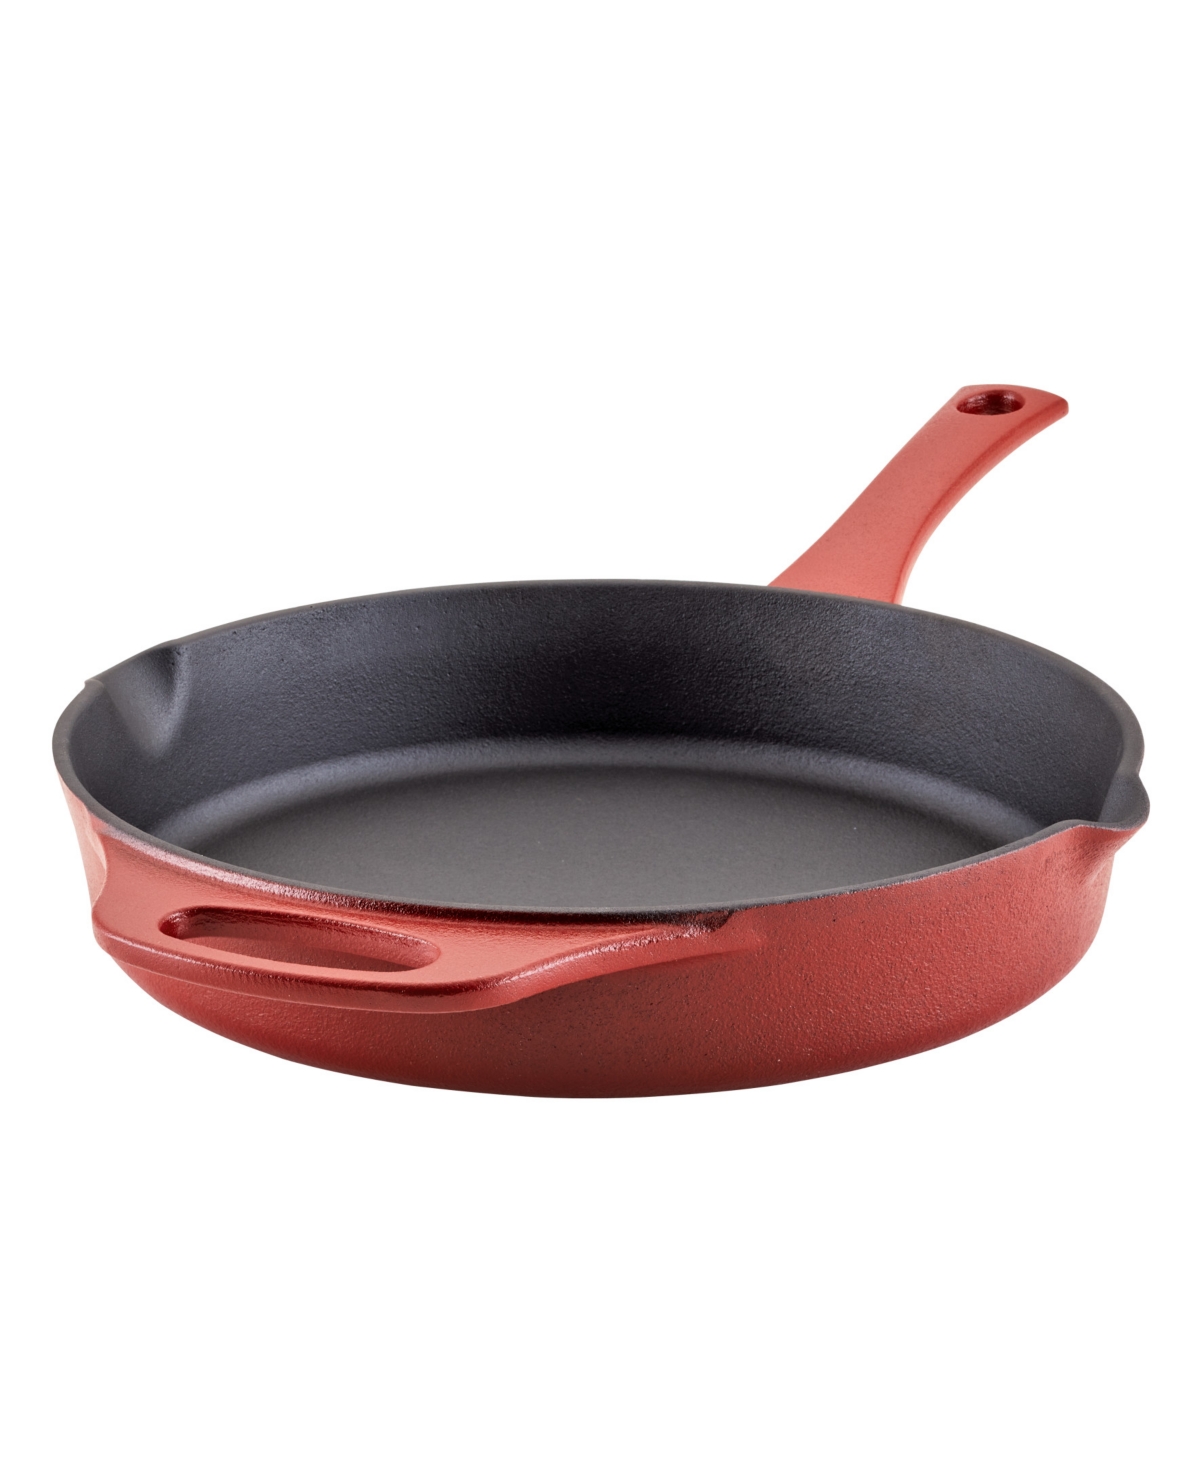 Shop Rachael Ray Nitro Cast Iron 10" Skillet In Red